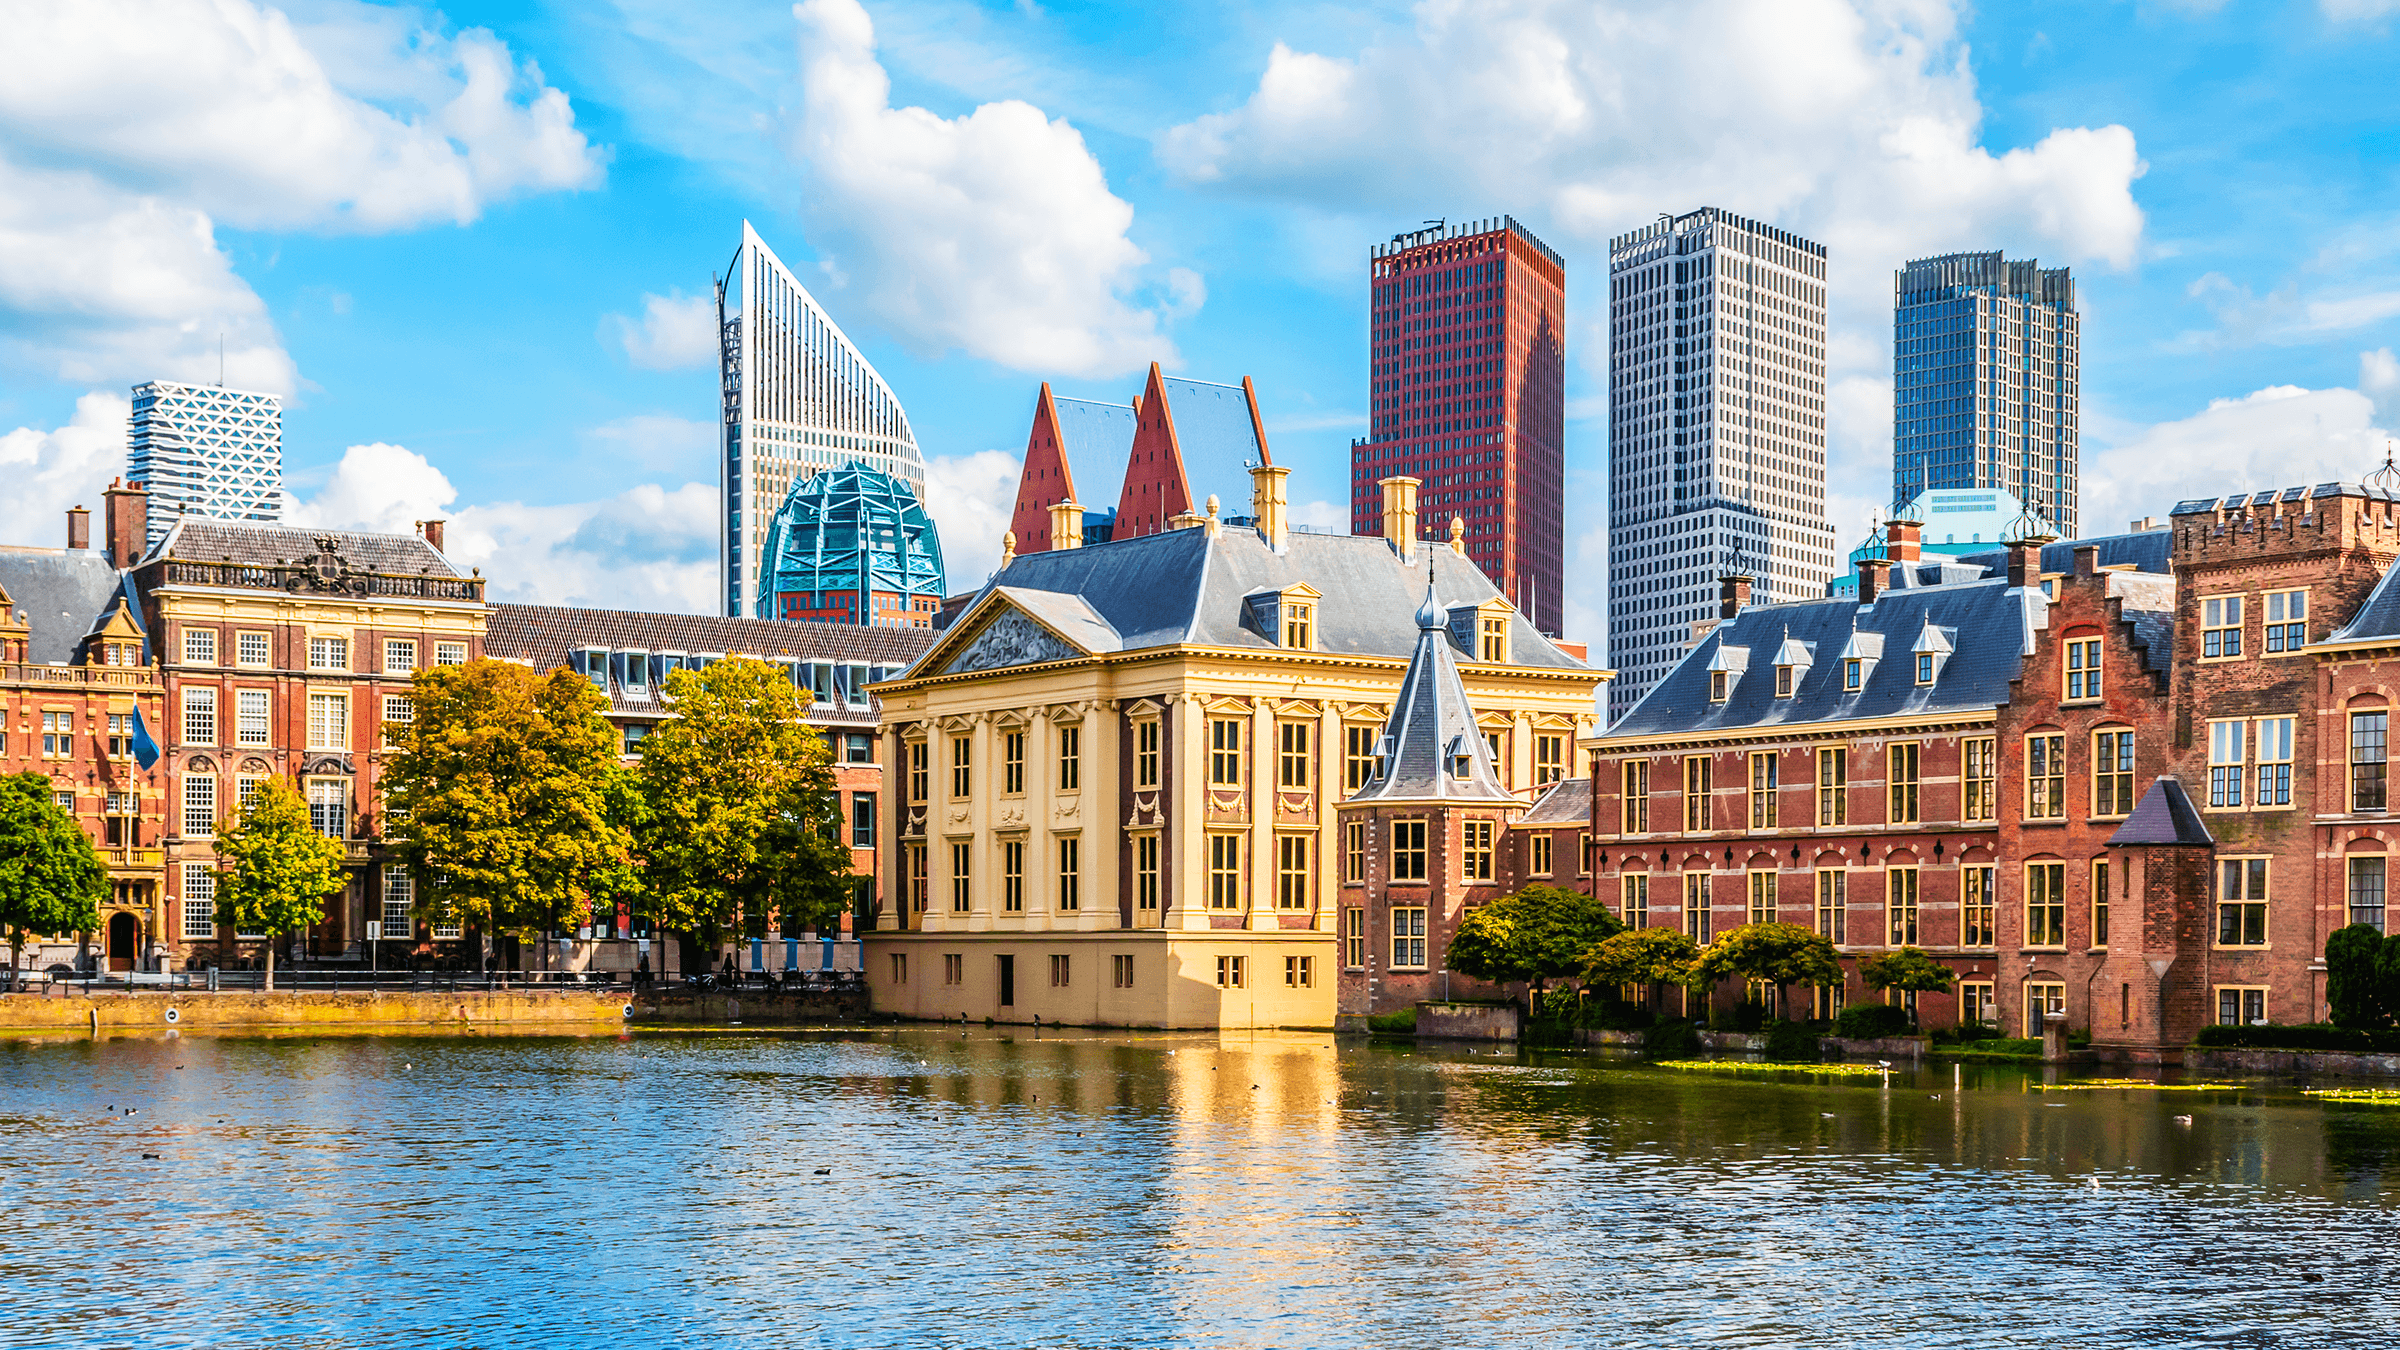 An image of the waterfornt at The Hague, The Netherlands